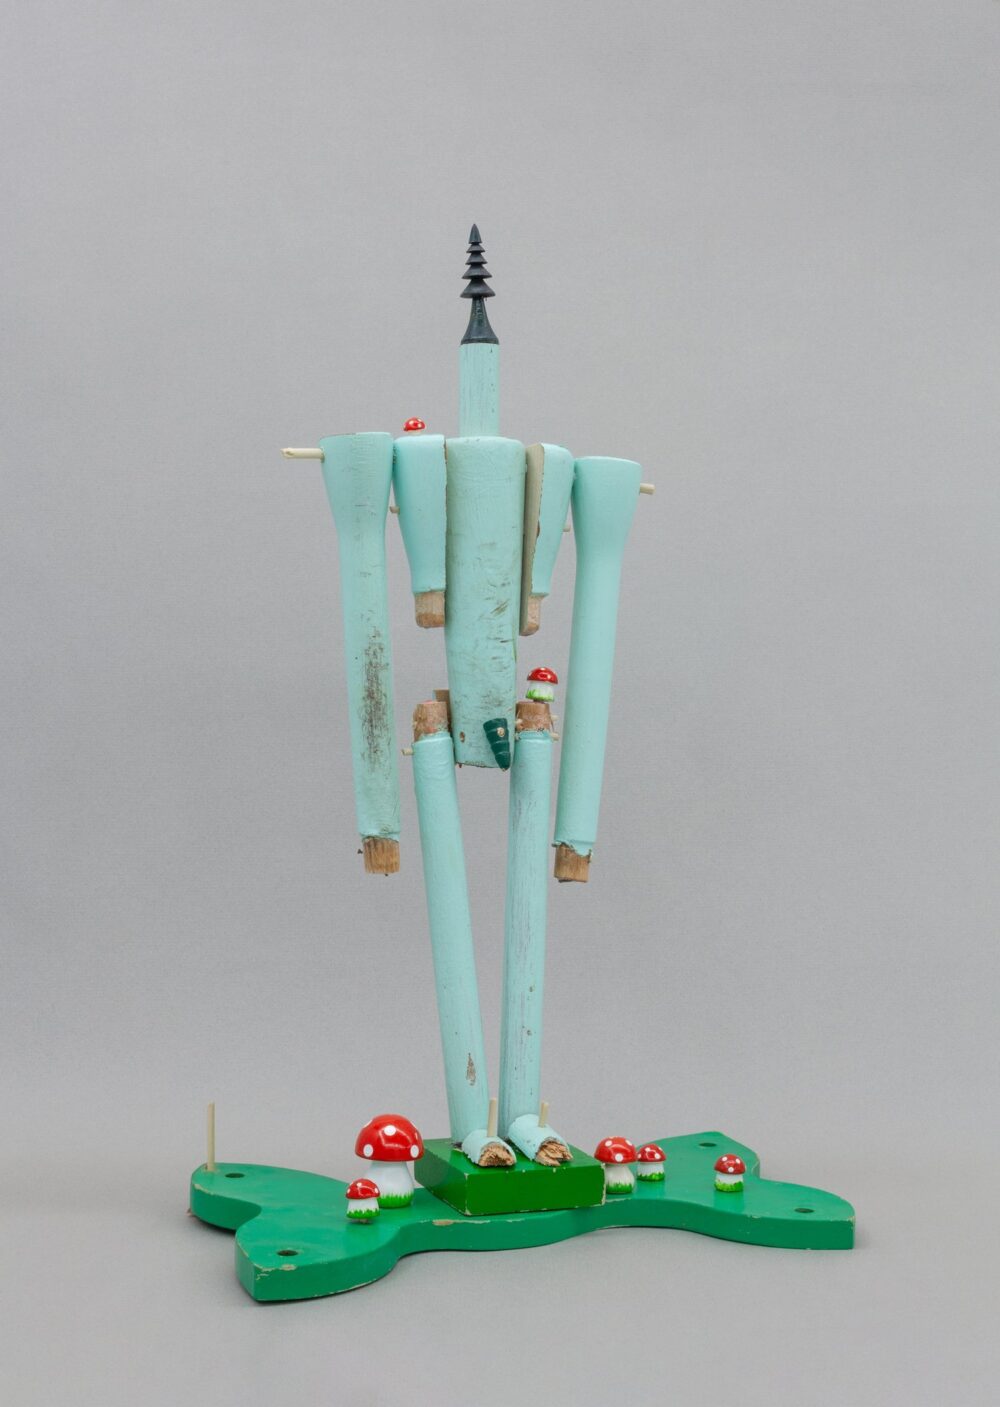 A small light blue wooden figurative sculpture with wooden mushrooms at its feet.